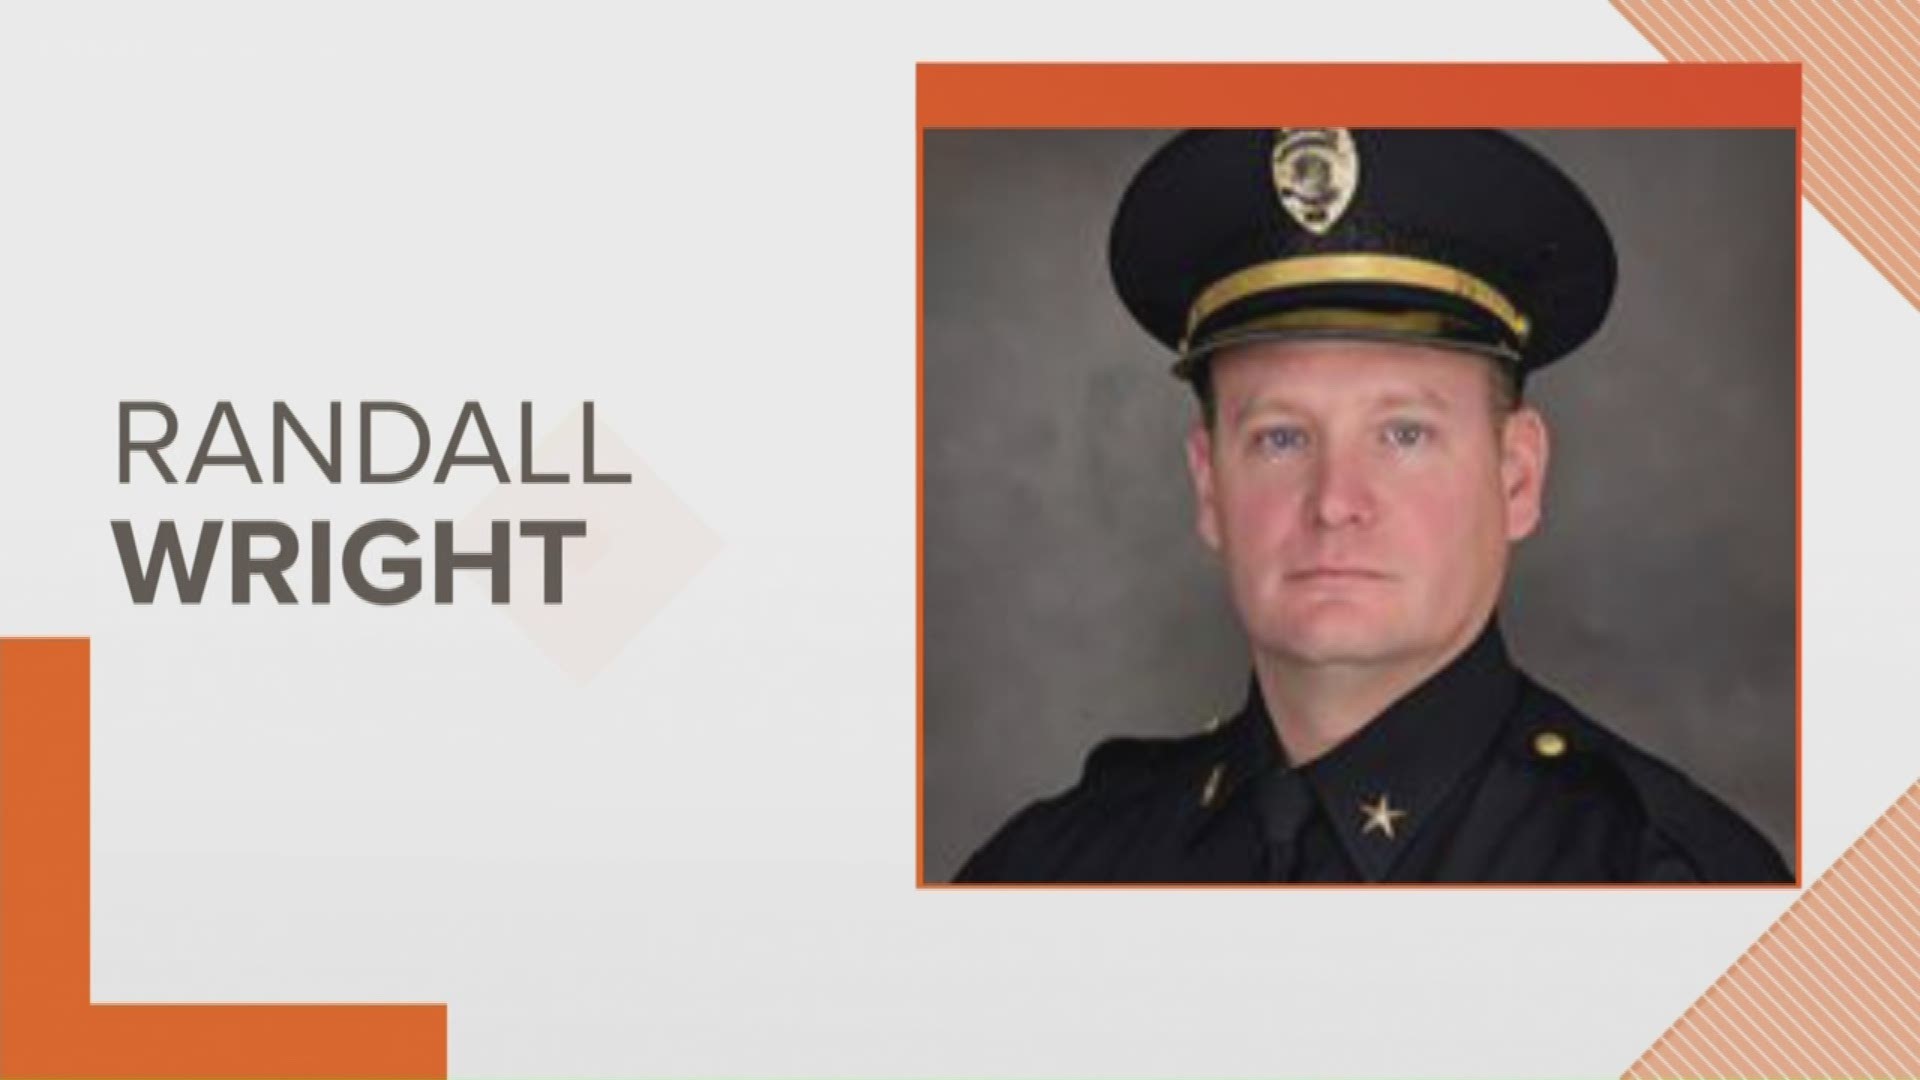 Michigan State Police Sgt. Ed Doyle confirms Fremont Police Chief Randall Wright is under investigation after a woman reported instances of “unwanted touching.”